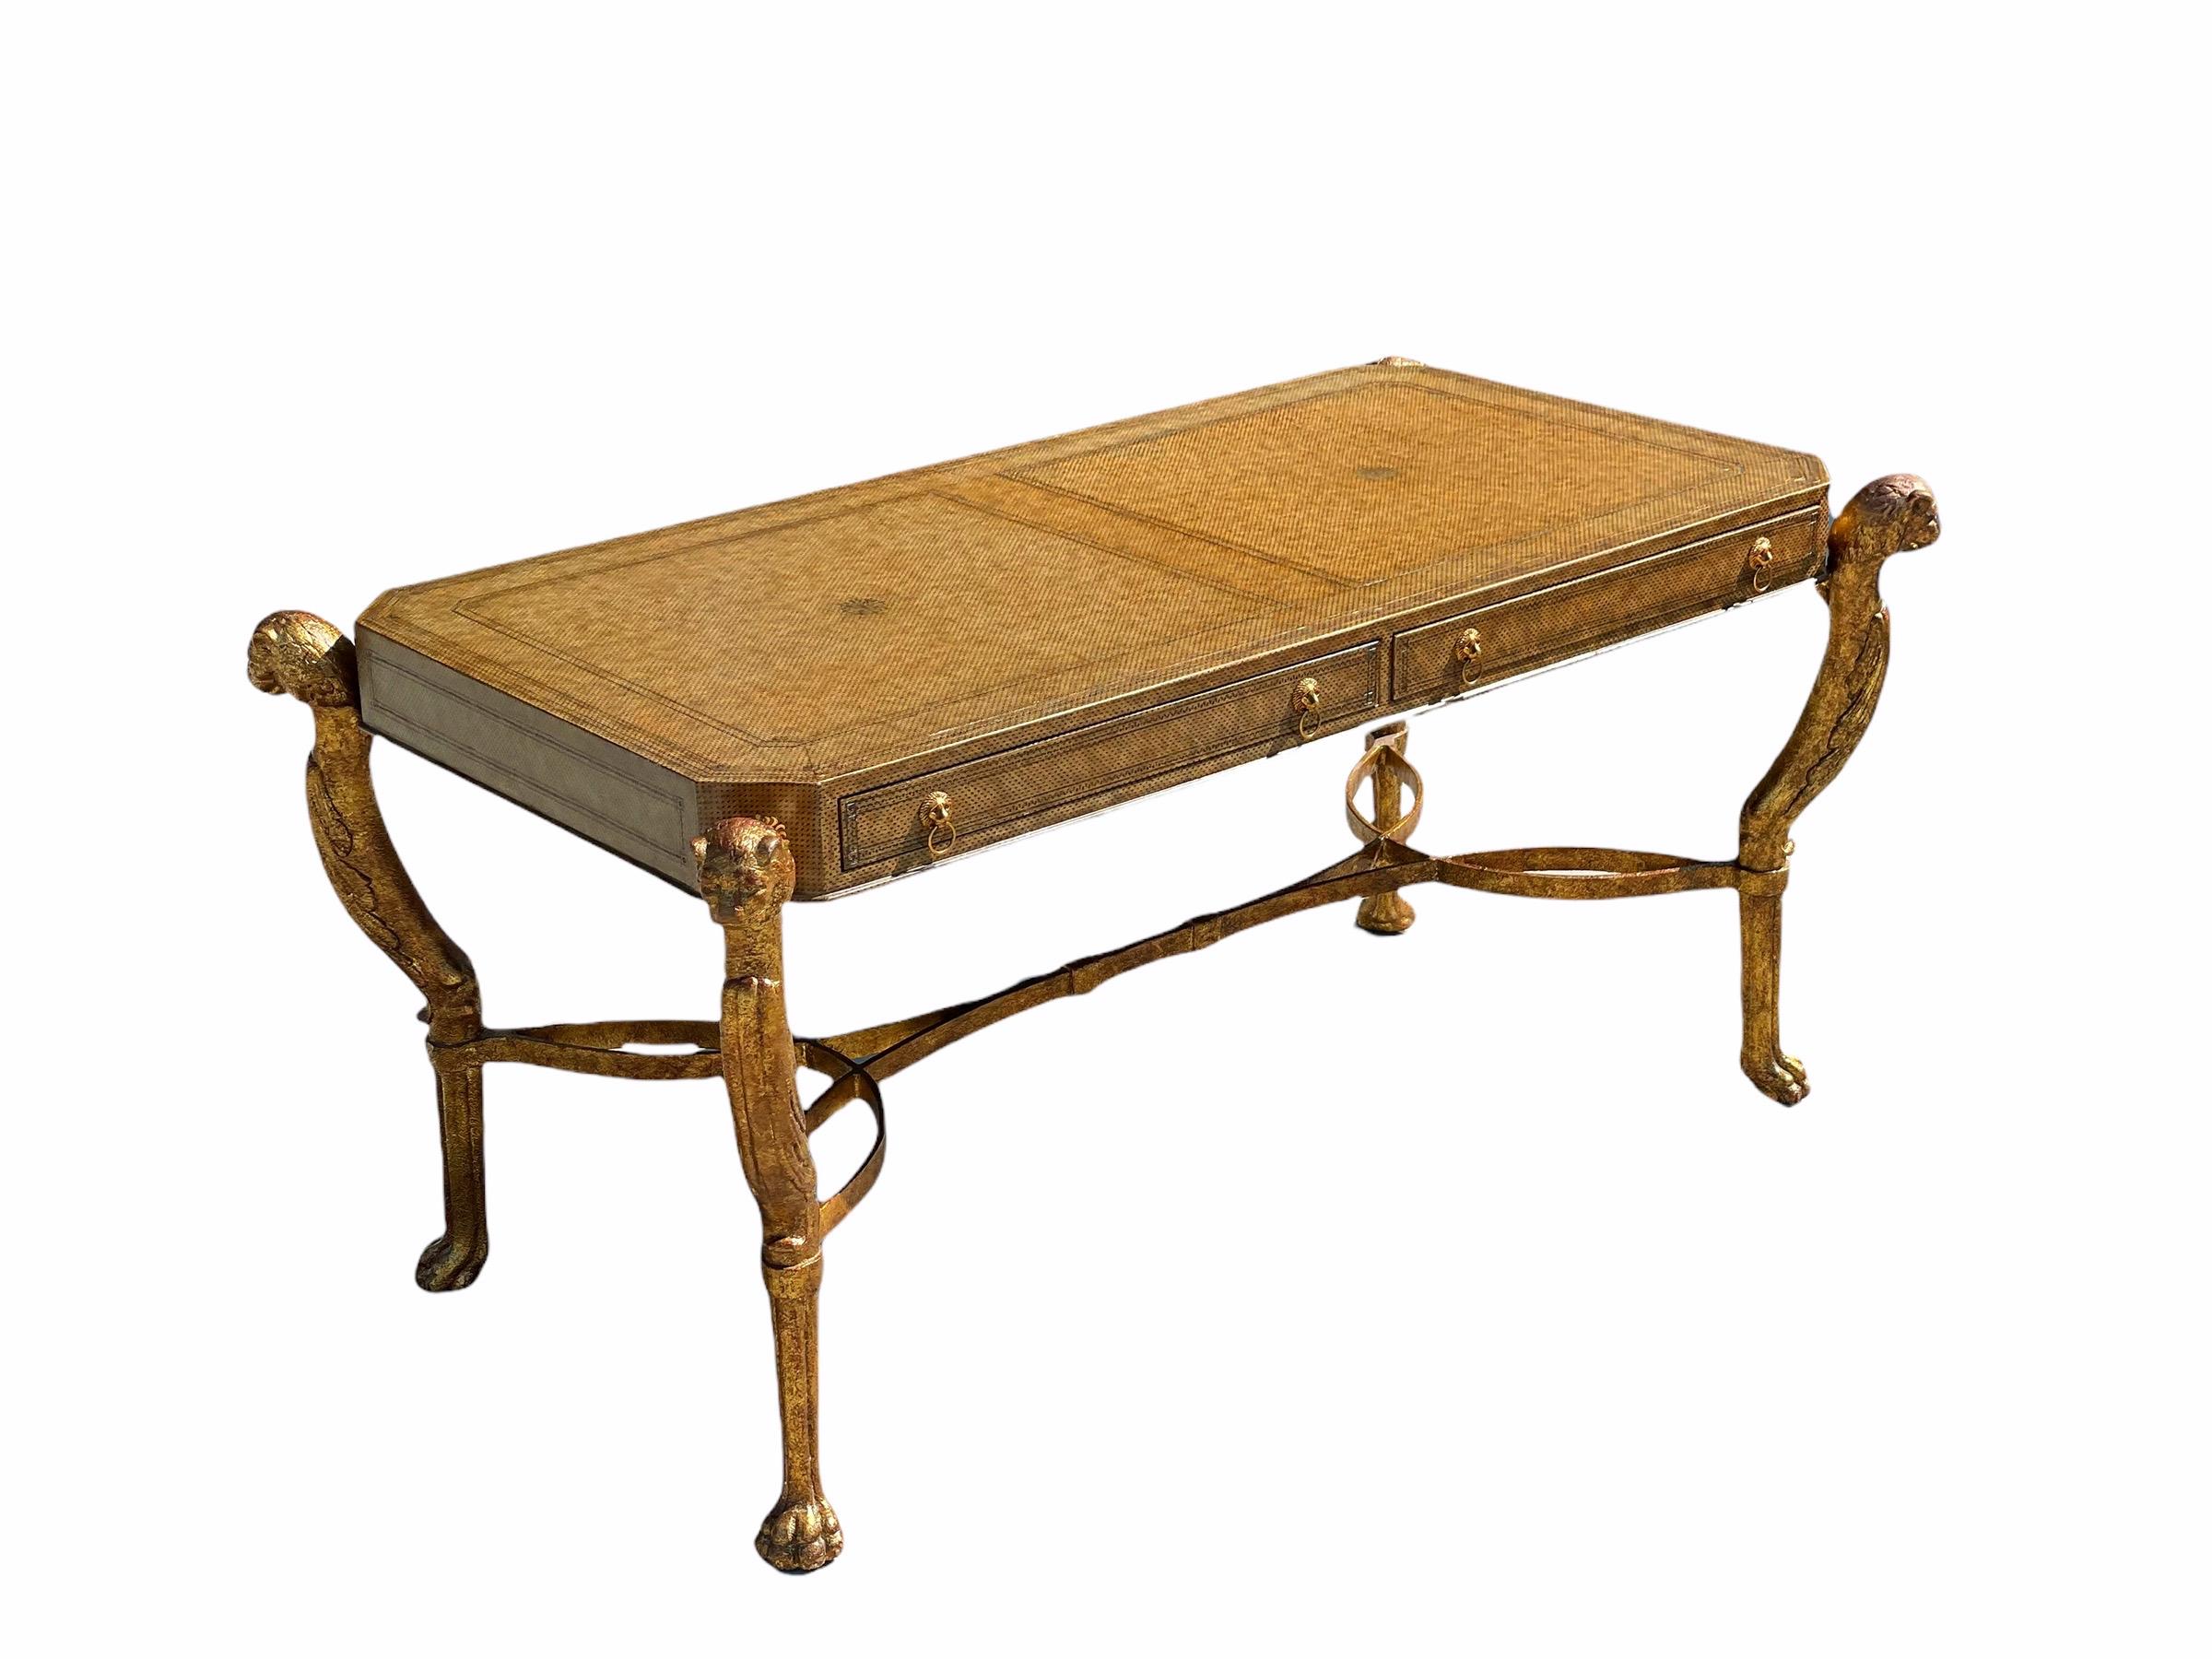 Metal Neoclassical Desk by Maitland Smith in Leather and Gilt Wrought Iron, Lion Head